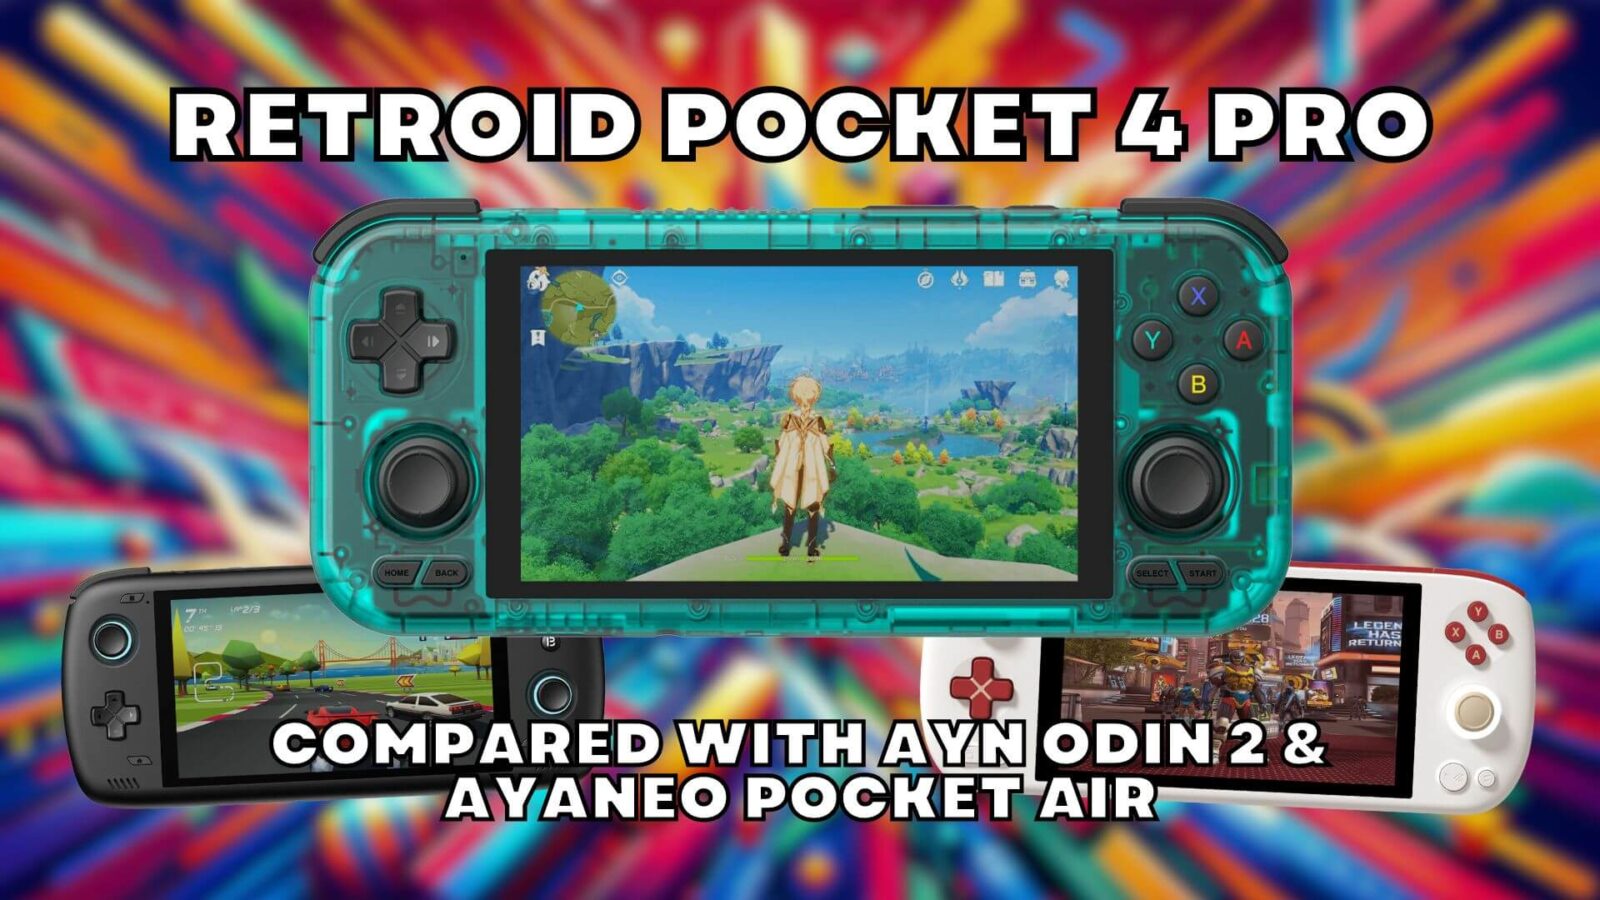 AYN Odin Pro Review - Excellent high performance Android handheld game  console - DroiX Blogs